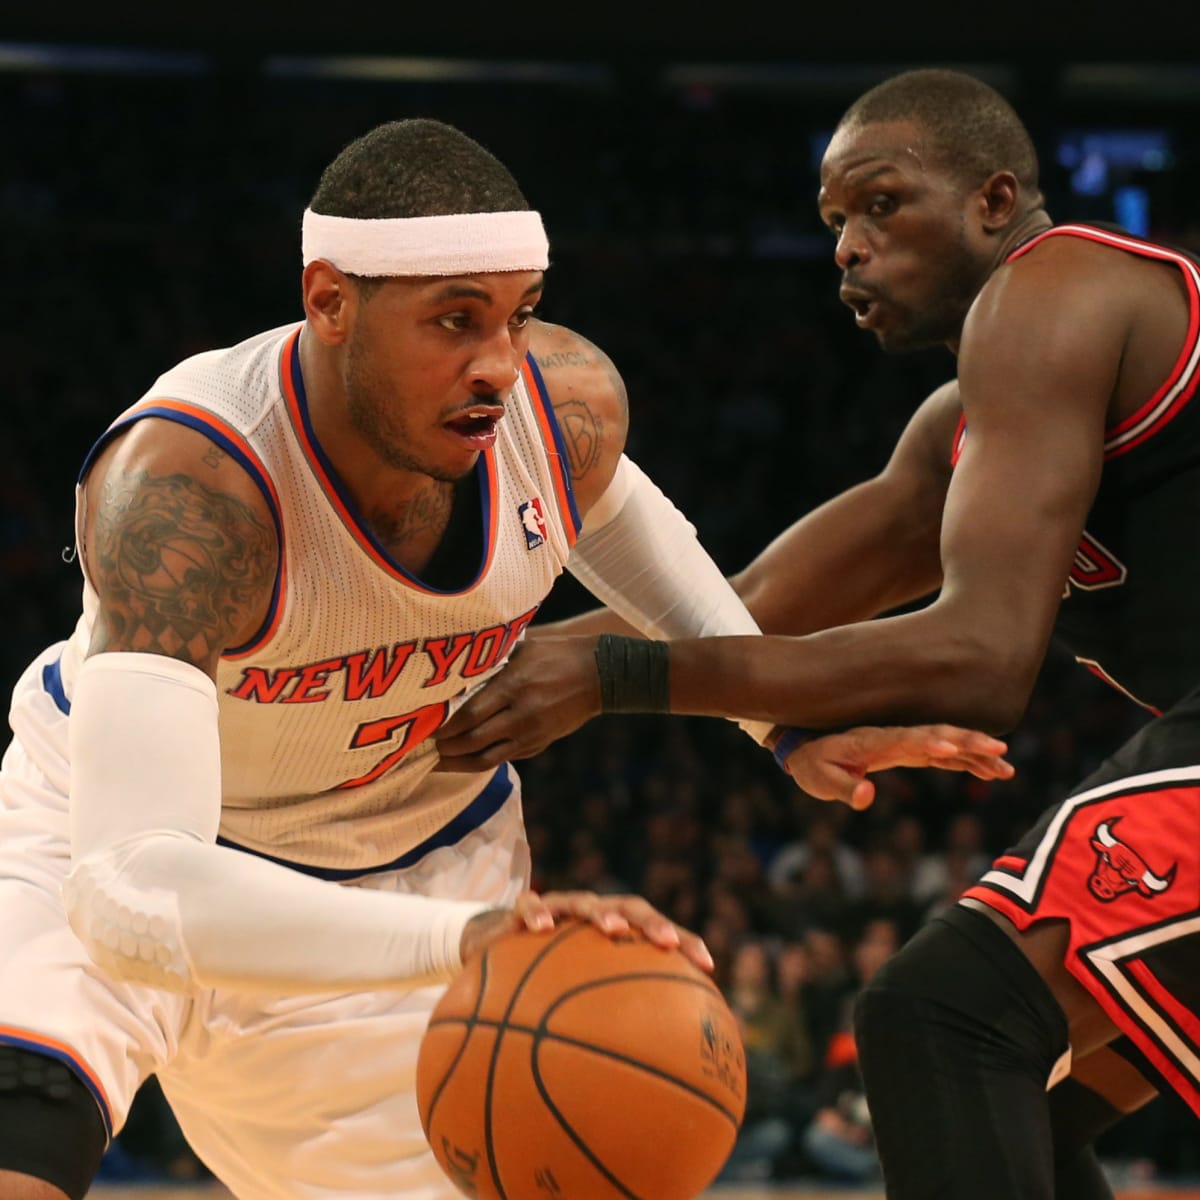 Carmelo Anthony Is Headed to the Chicago Bulls